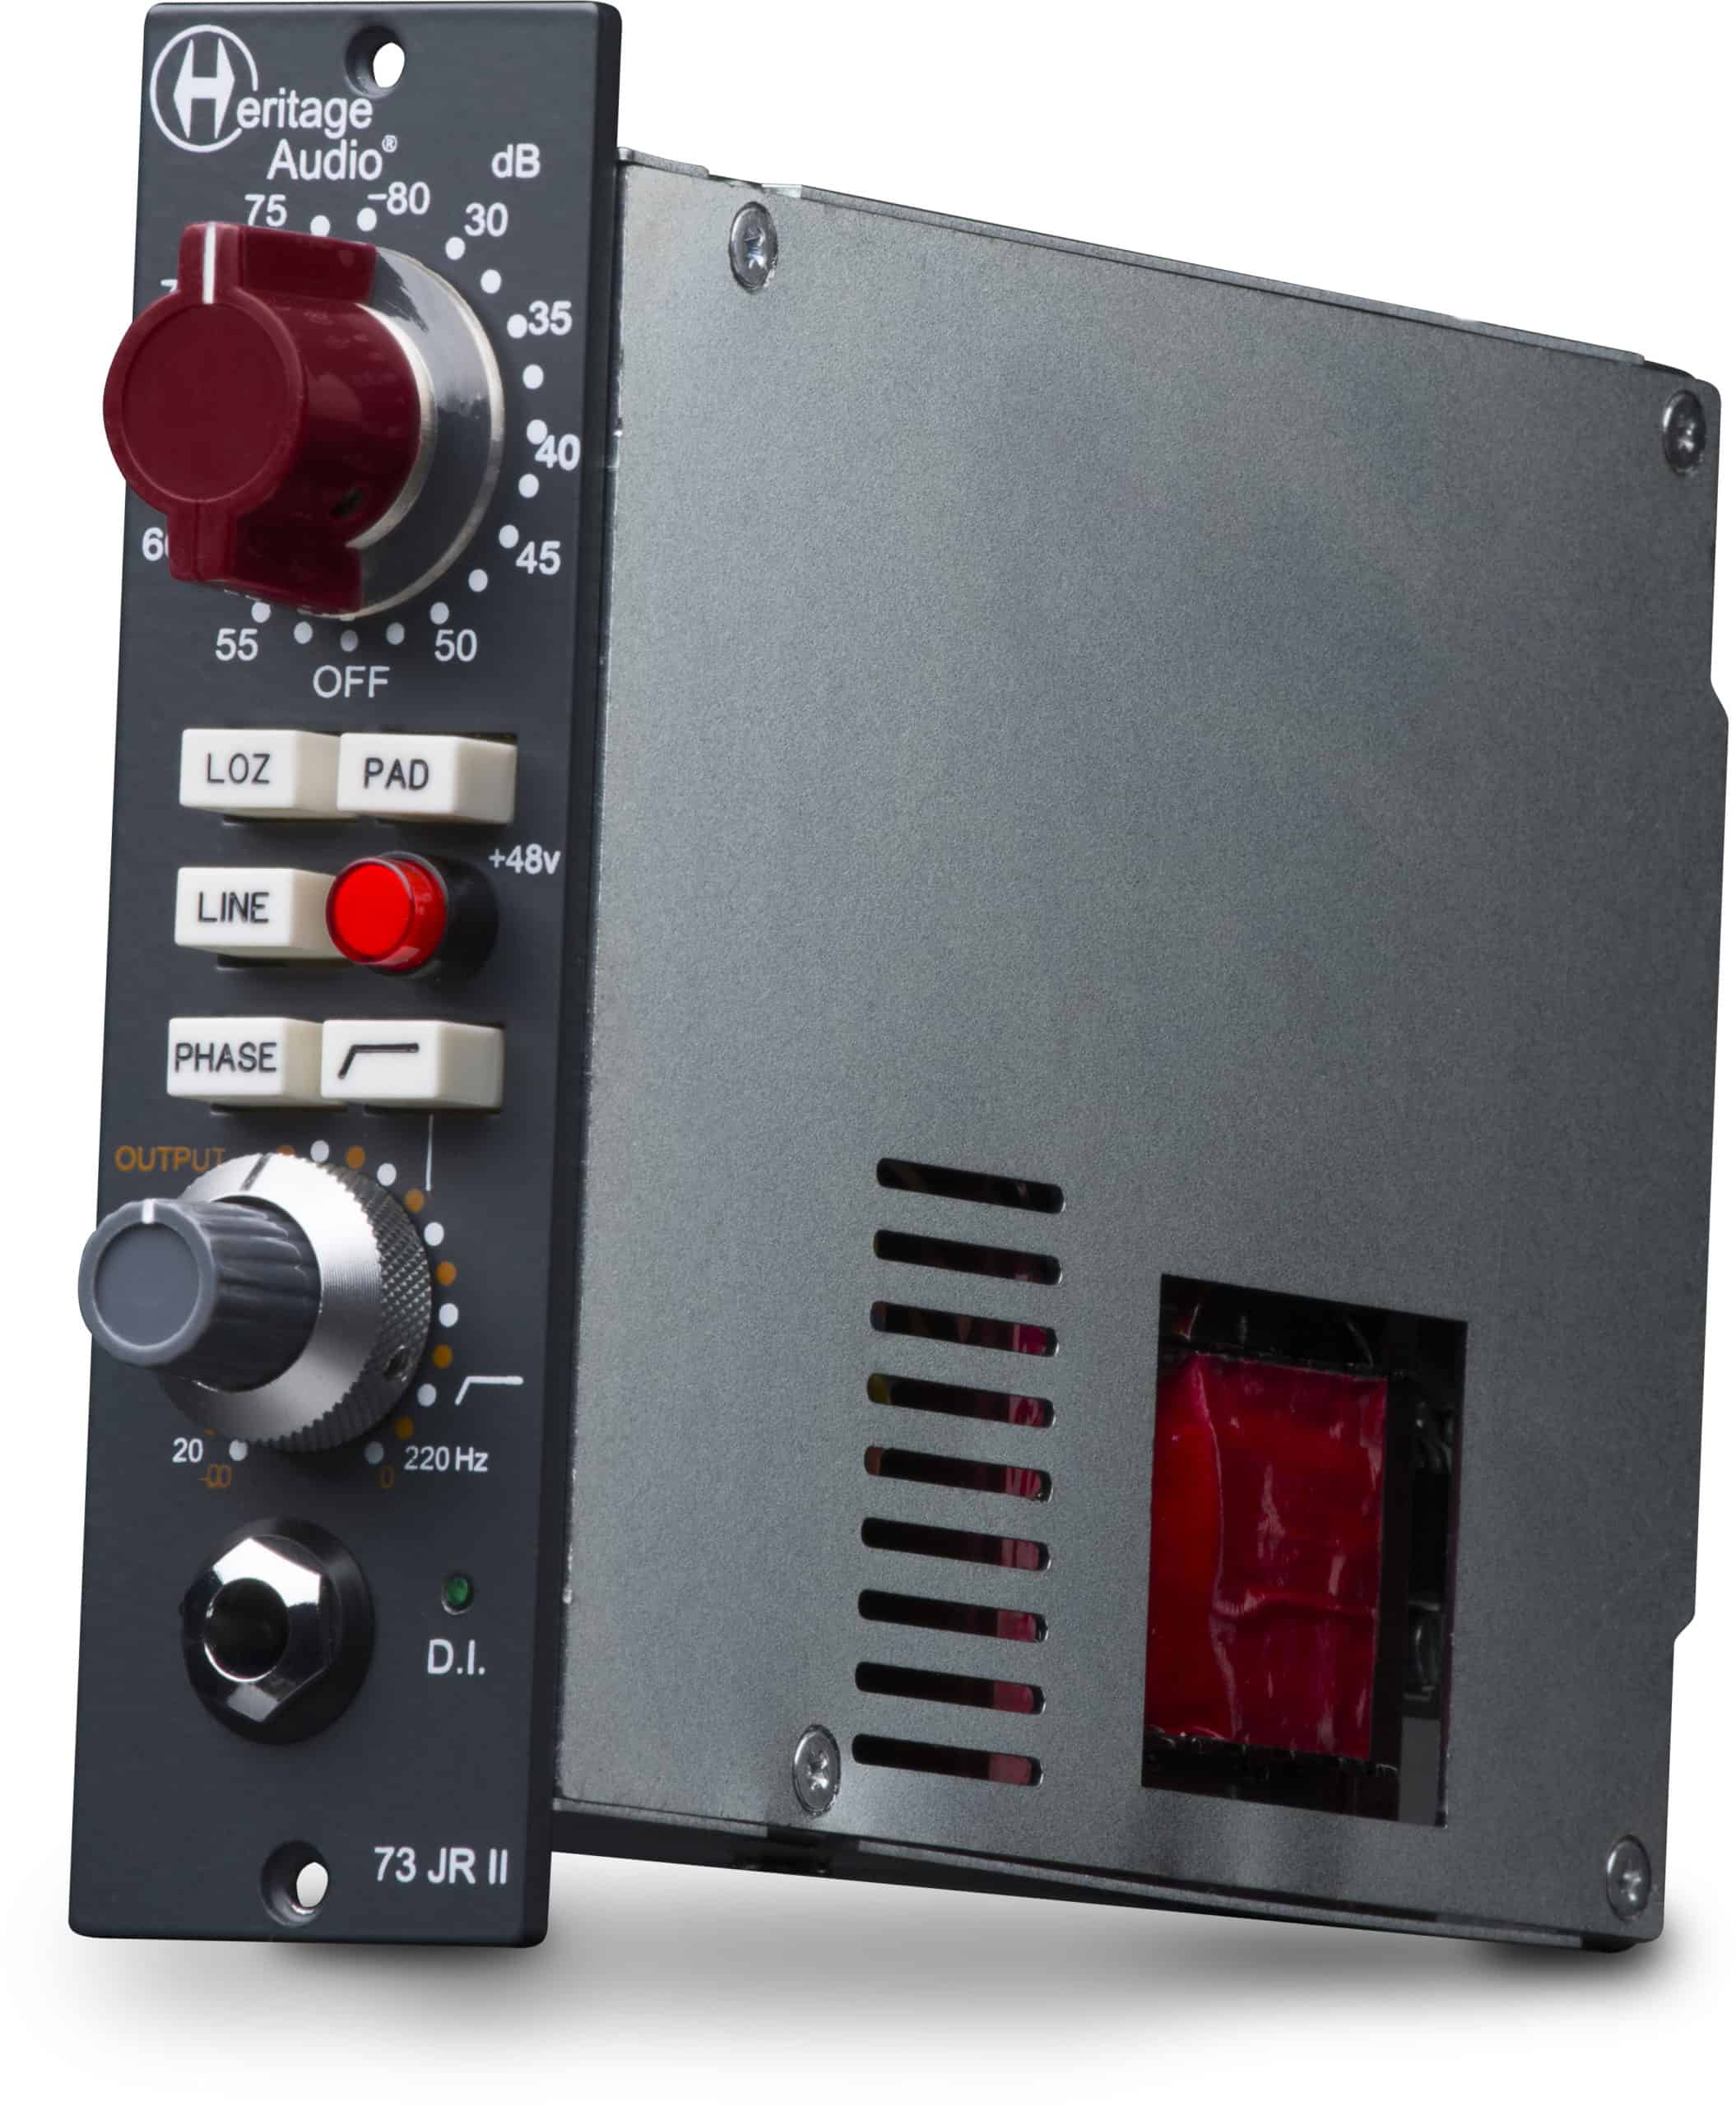 Heritage Audio Improves 500 Series 73-style mic Pre-Amp with 73JR II